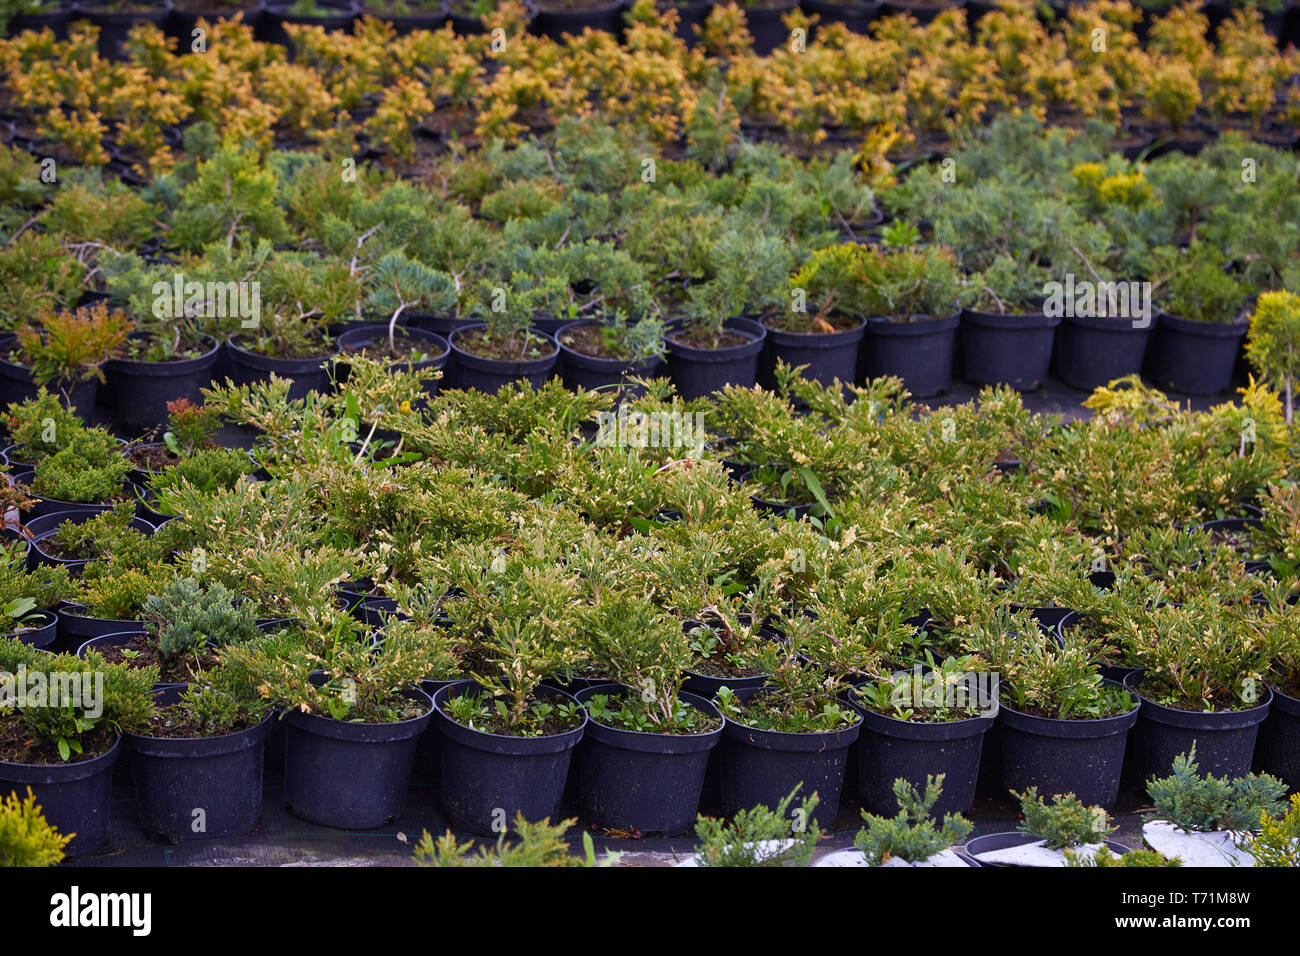 Juniper bushes in garden shop. Seedlings of juniper bushes in pots in garden store spring. Nursery of various green spruce plants for gardening. Diffe Stock Photo